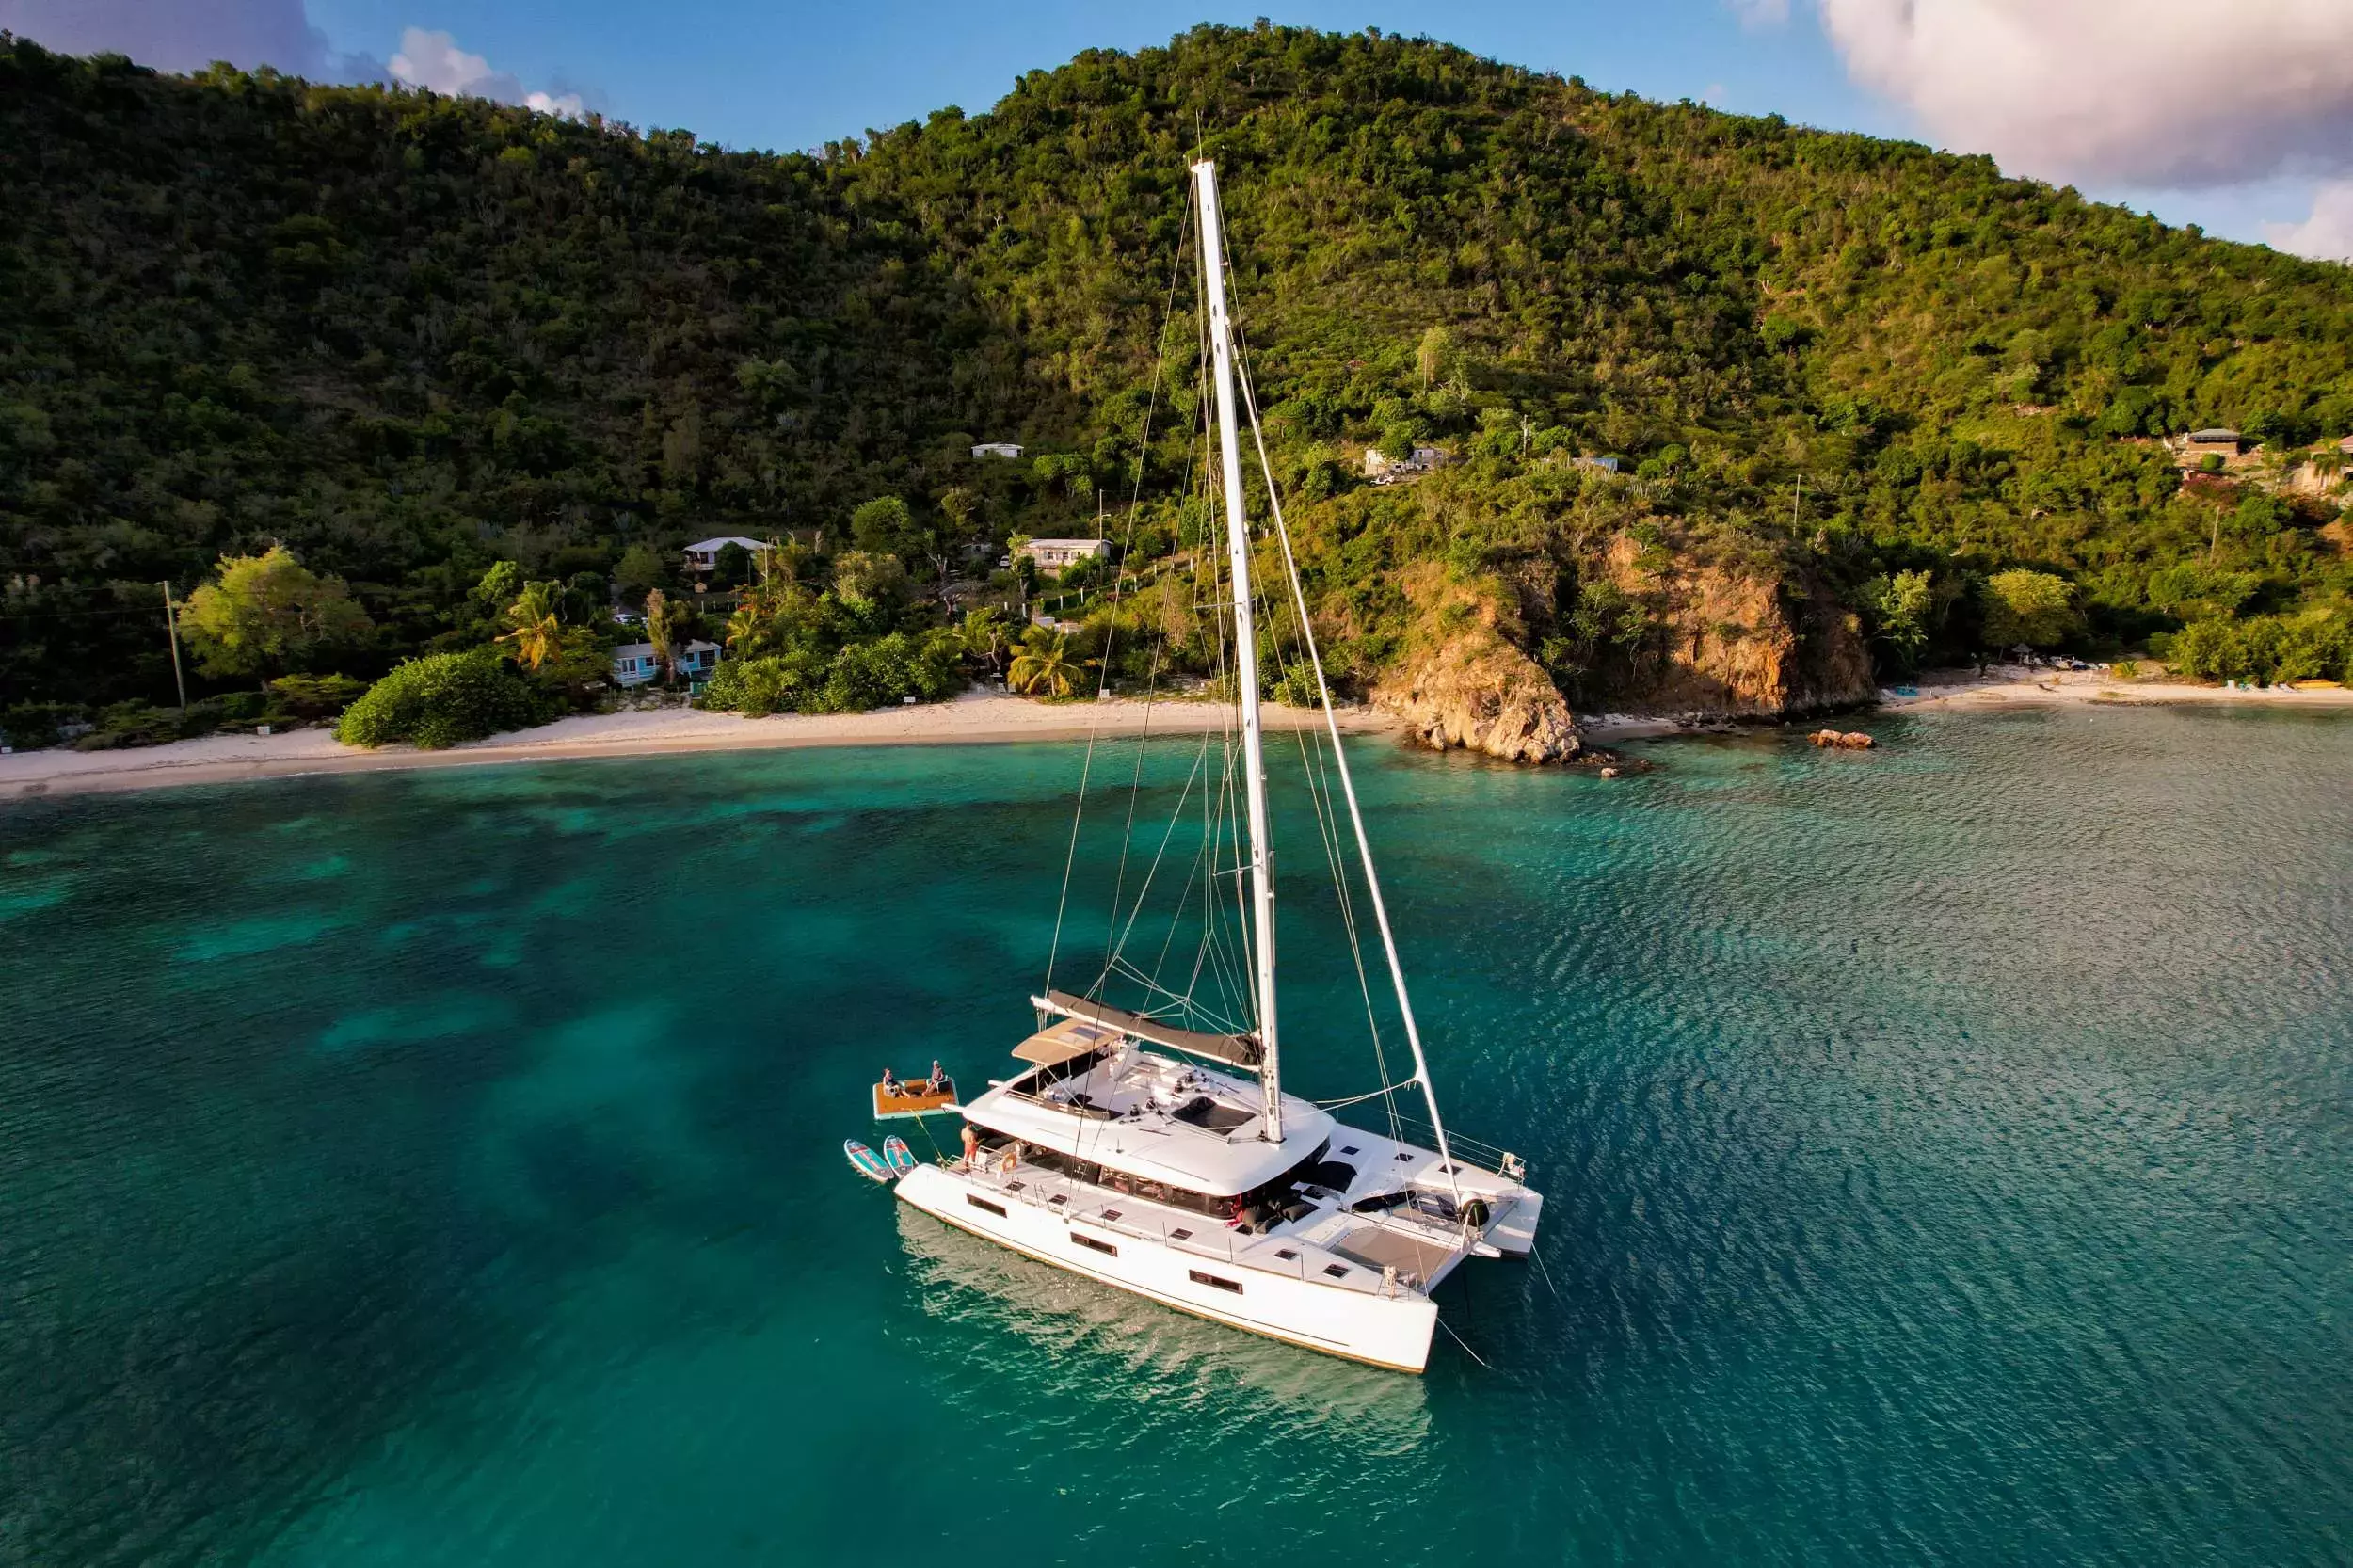 The Pursuit by Lagoon - Top rates for a Charter of a private Luxury Catamaran in Puerto Rico